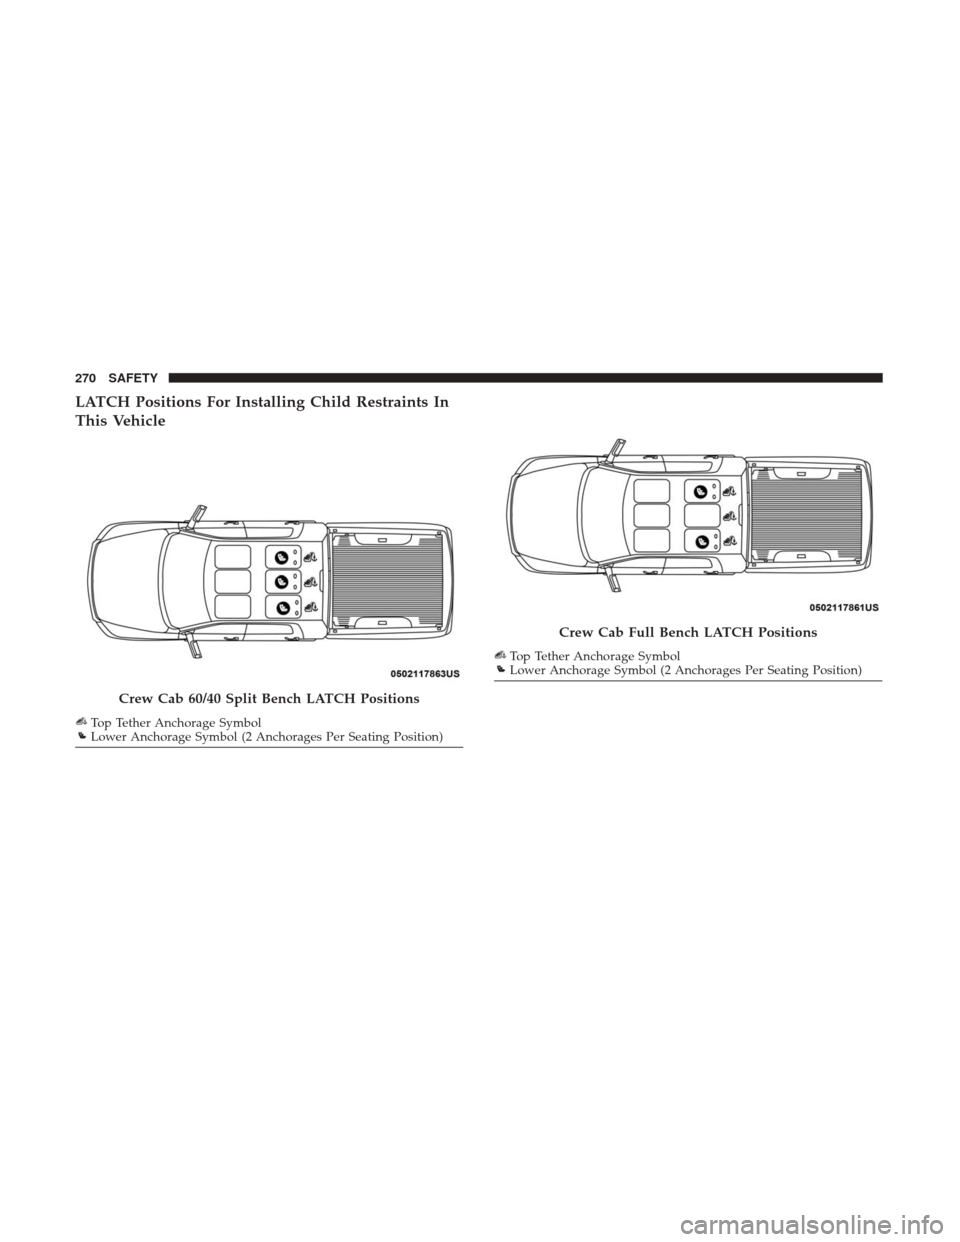 Ram 1500 2019 Owners Guide LATCH Positions For Installing Child Restraints In
This Vehicle
Crew Cab 60/40 Split Bench LATCH Positions
Top Tether Anchorage SymbolLower Anchorage Symbol (2 Anchorages Per Seating Position)
Crew Ca